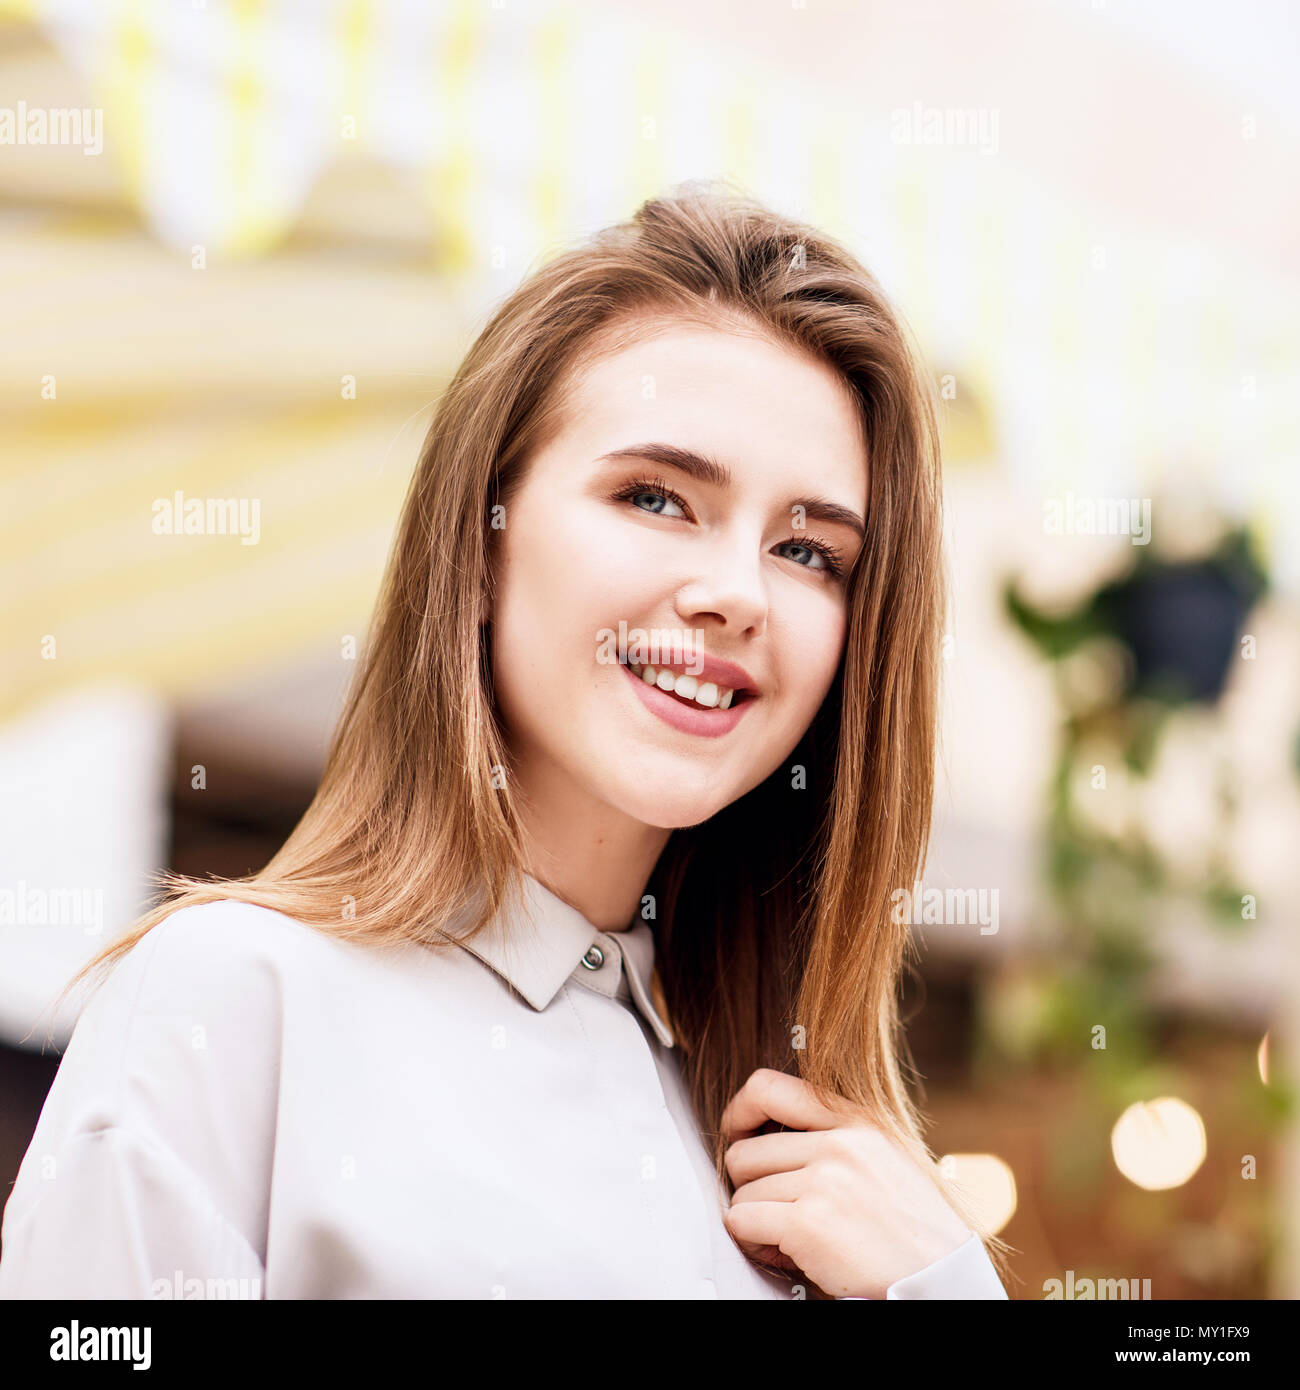 Portrait of young beautiful woman. Stock Photo